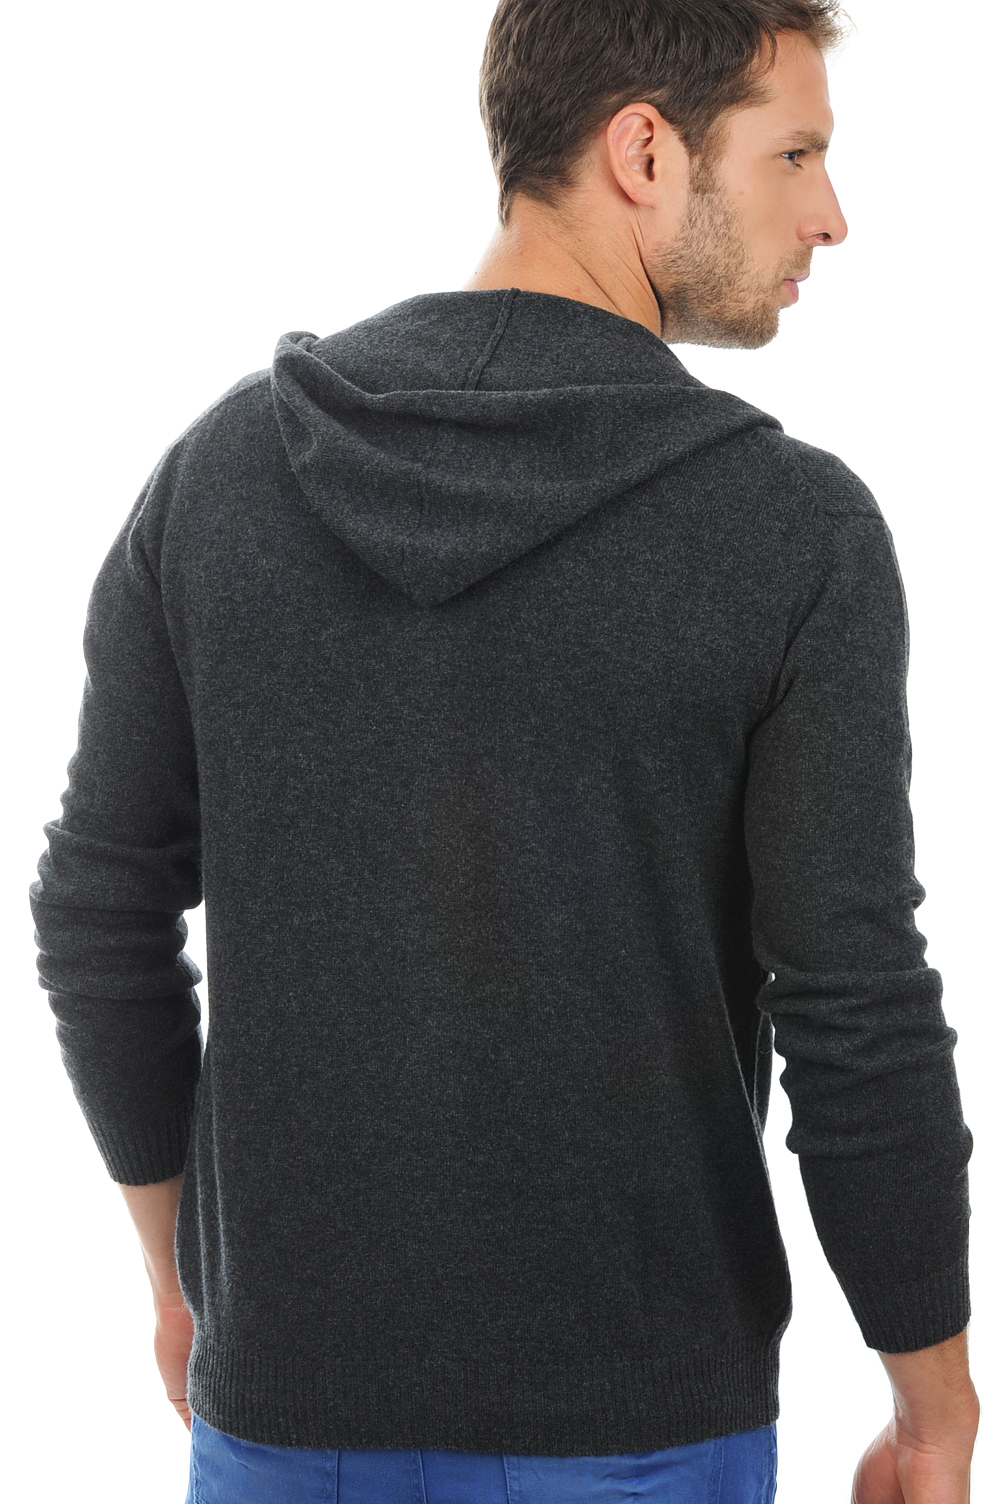 Cachemire pull homme hiro anthracite chine l